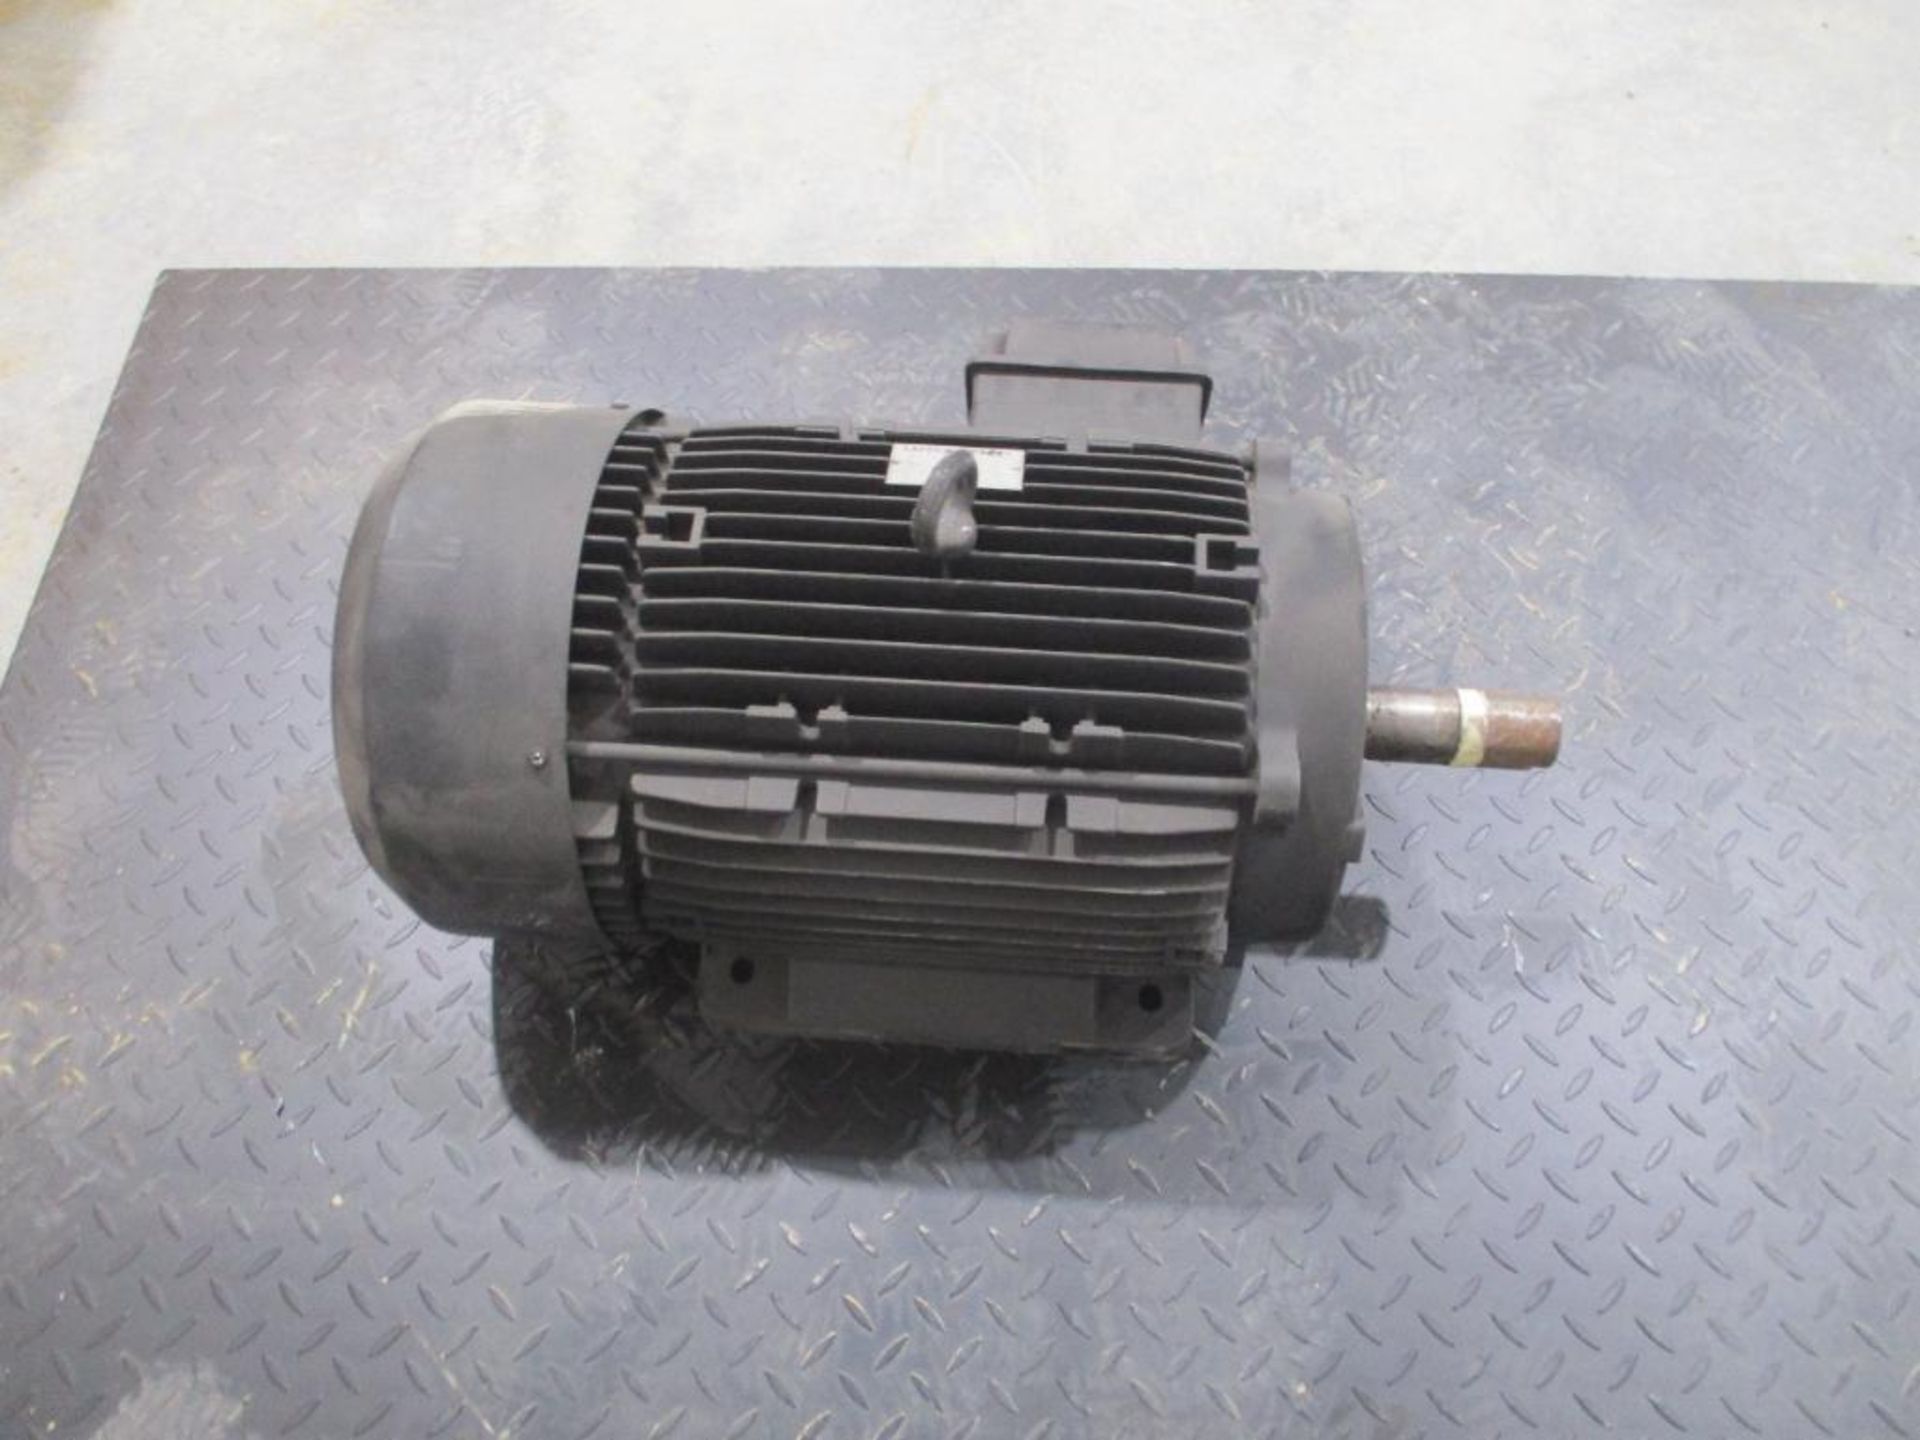 LAFERT 20HP 1475-1770RPM A/C MOTOR P/N AAMH160LZA4, 287# lbs (There will be a $40 Rigging/Prep fee a - Image 3 of 5